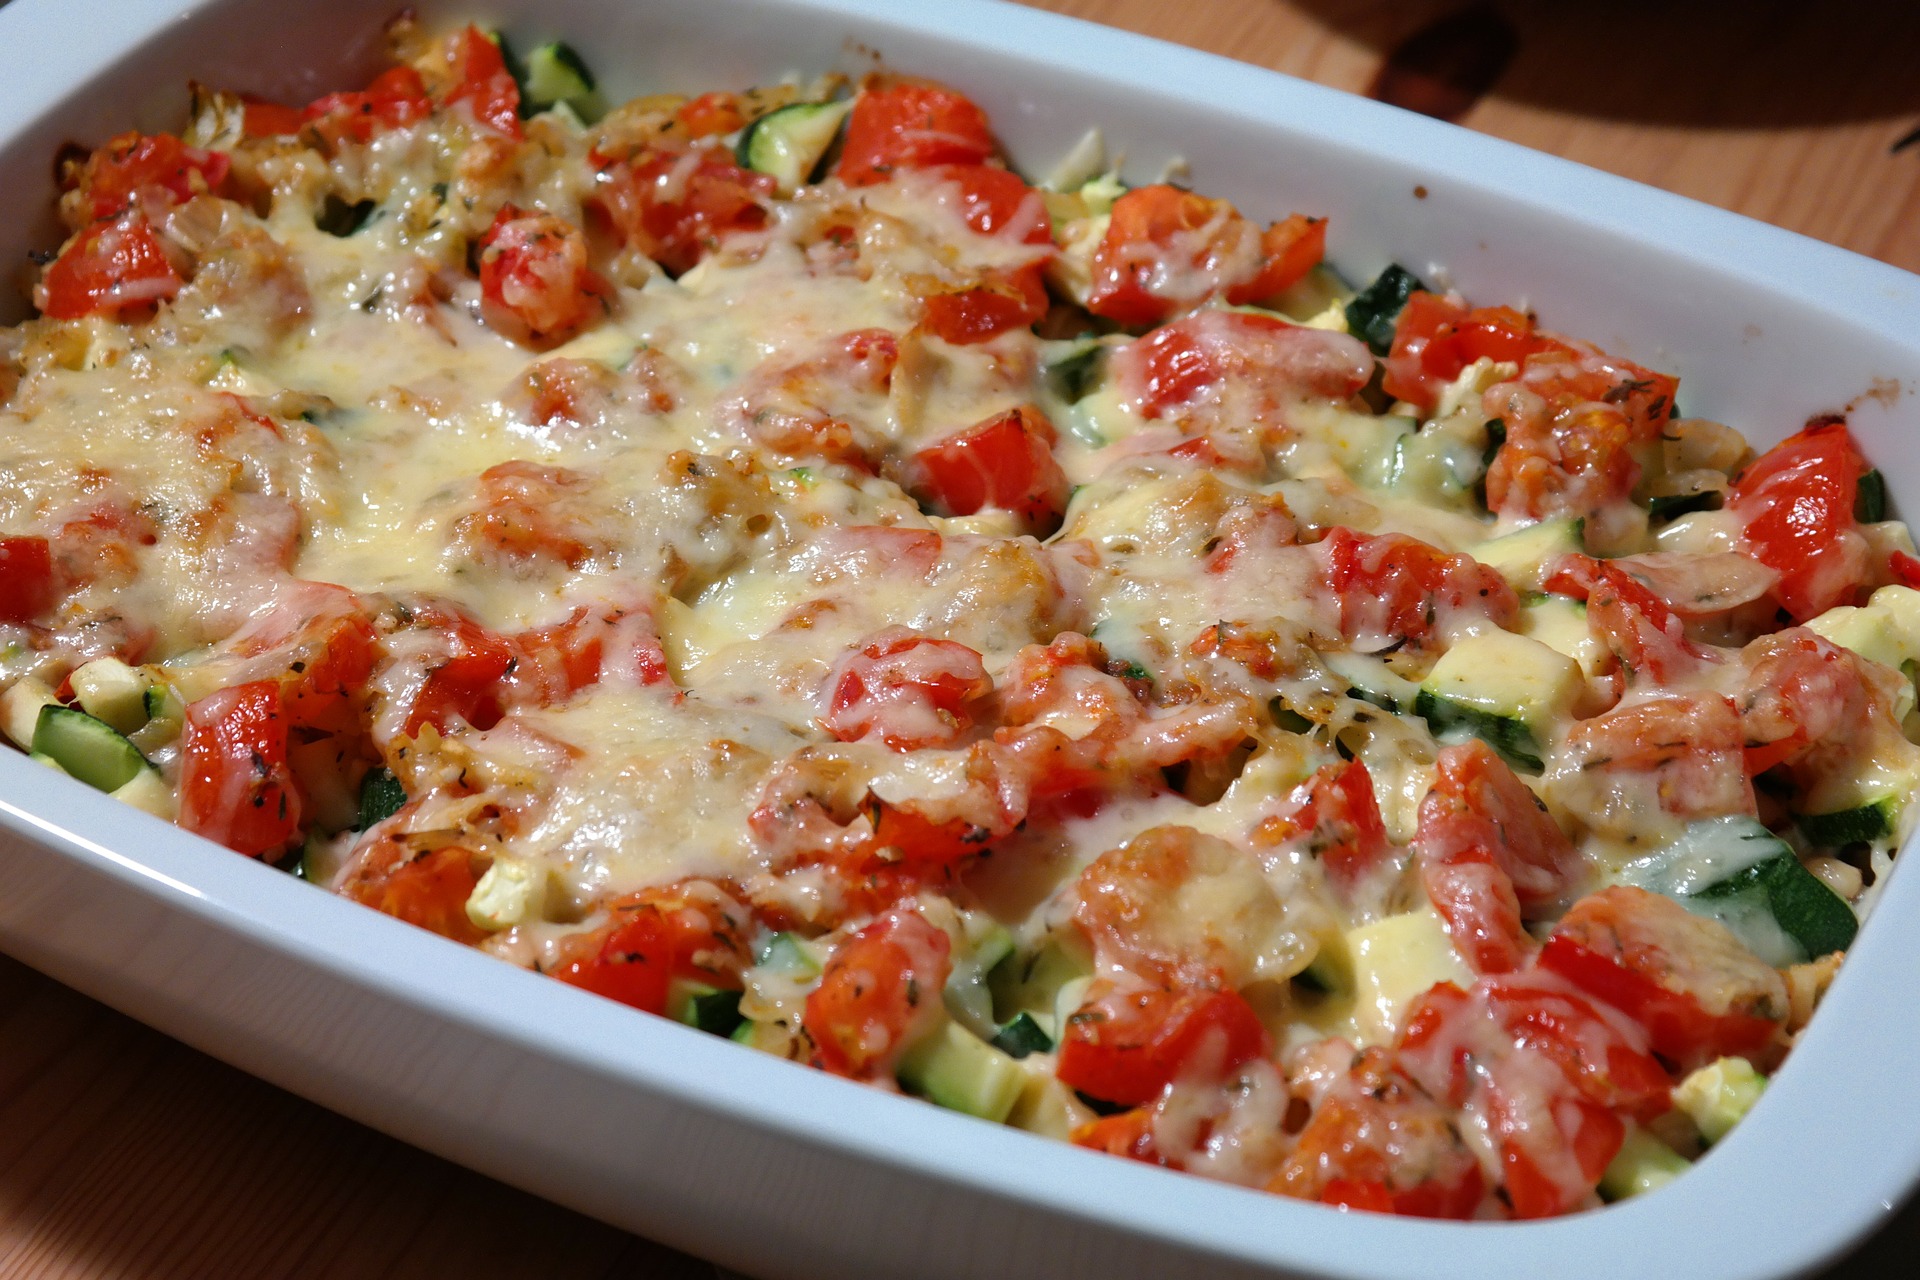 Vegetable casserole topped with cheese